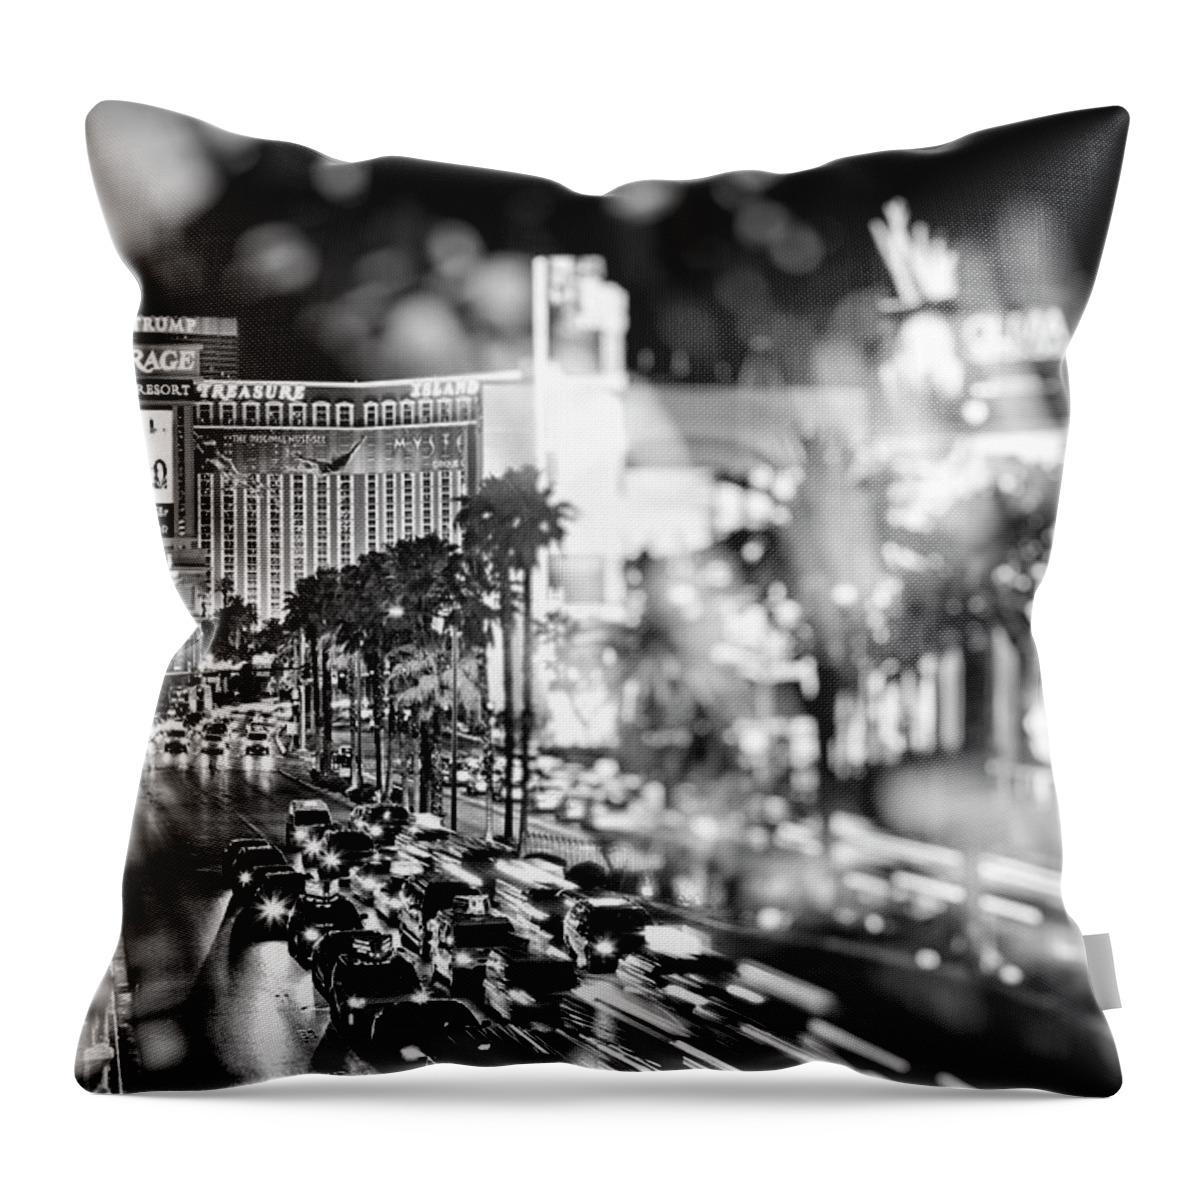  Las Throw Pillow featuring the photograph Blurry Vegas Nights III by Ricky Barnard